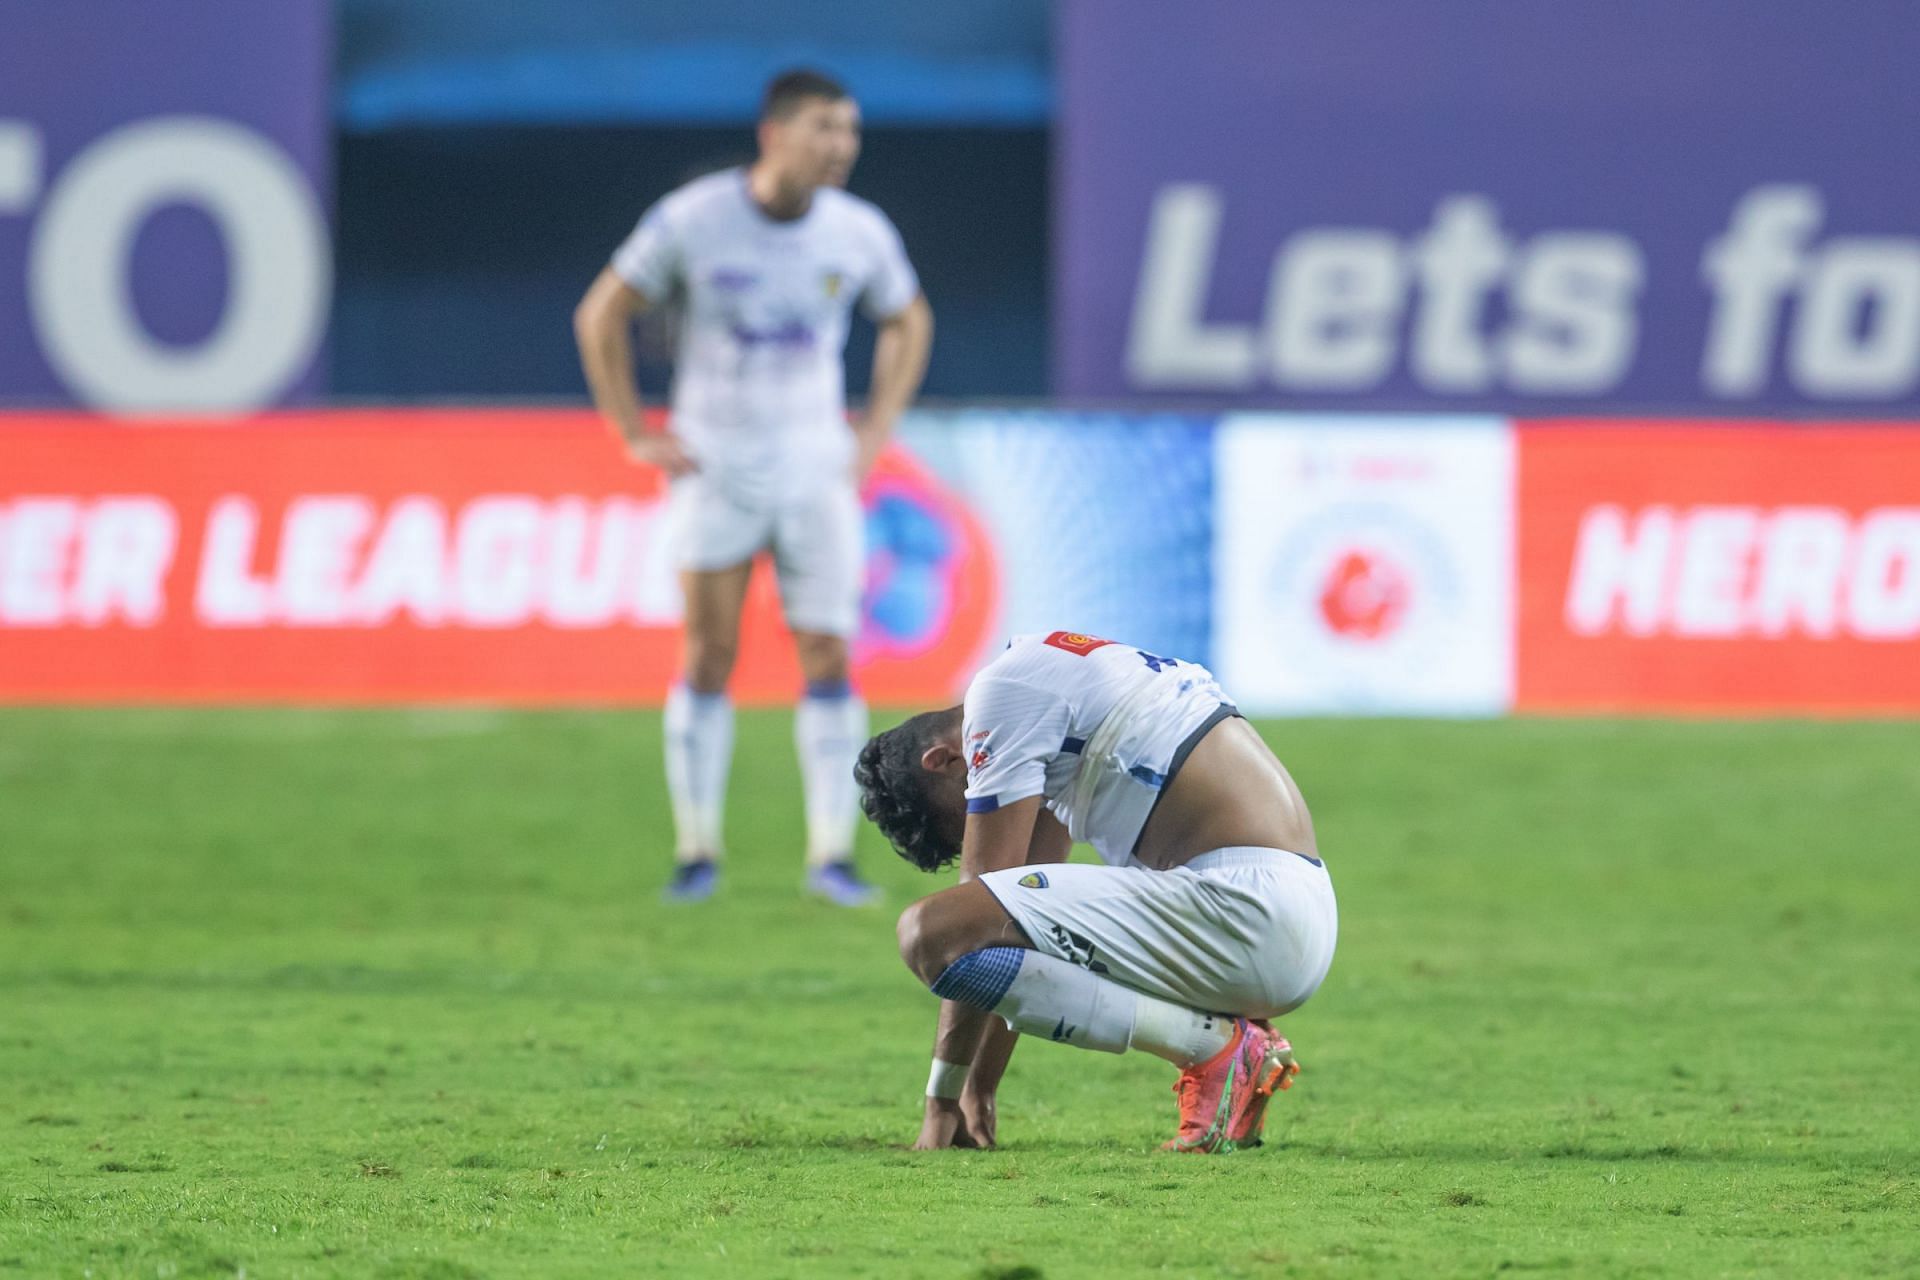 Things have gone downhill for the Marina Machans in their ISL 2021-22 campaign (Image Courtesy: ISL)